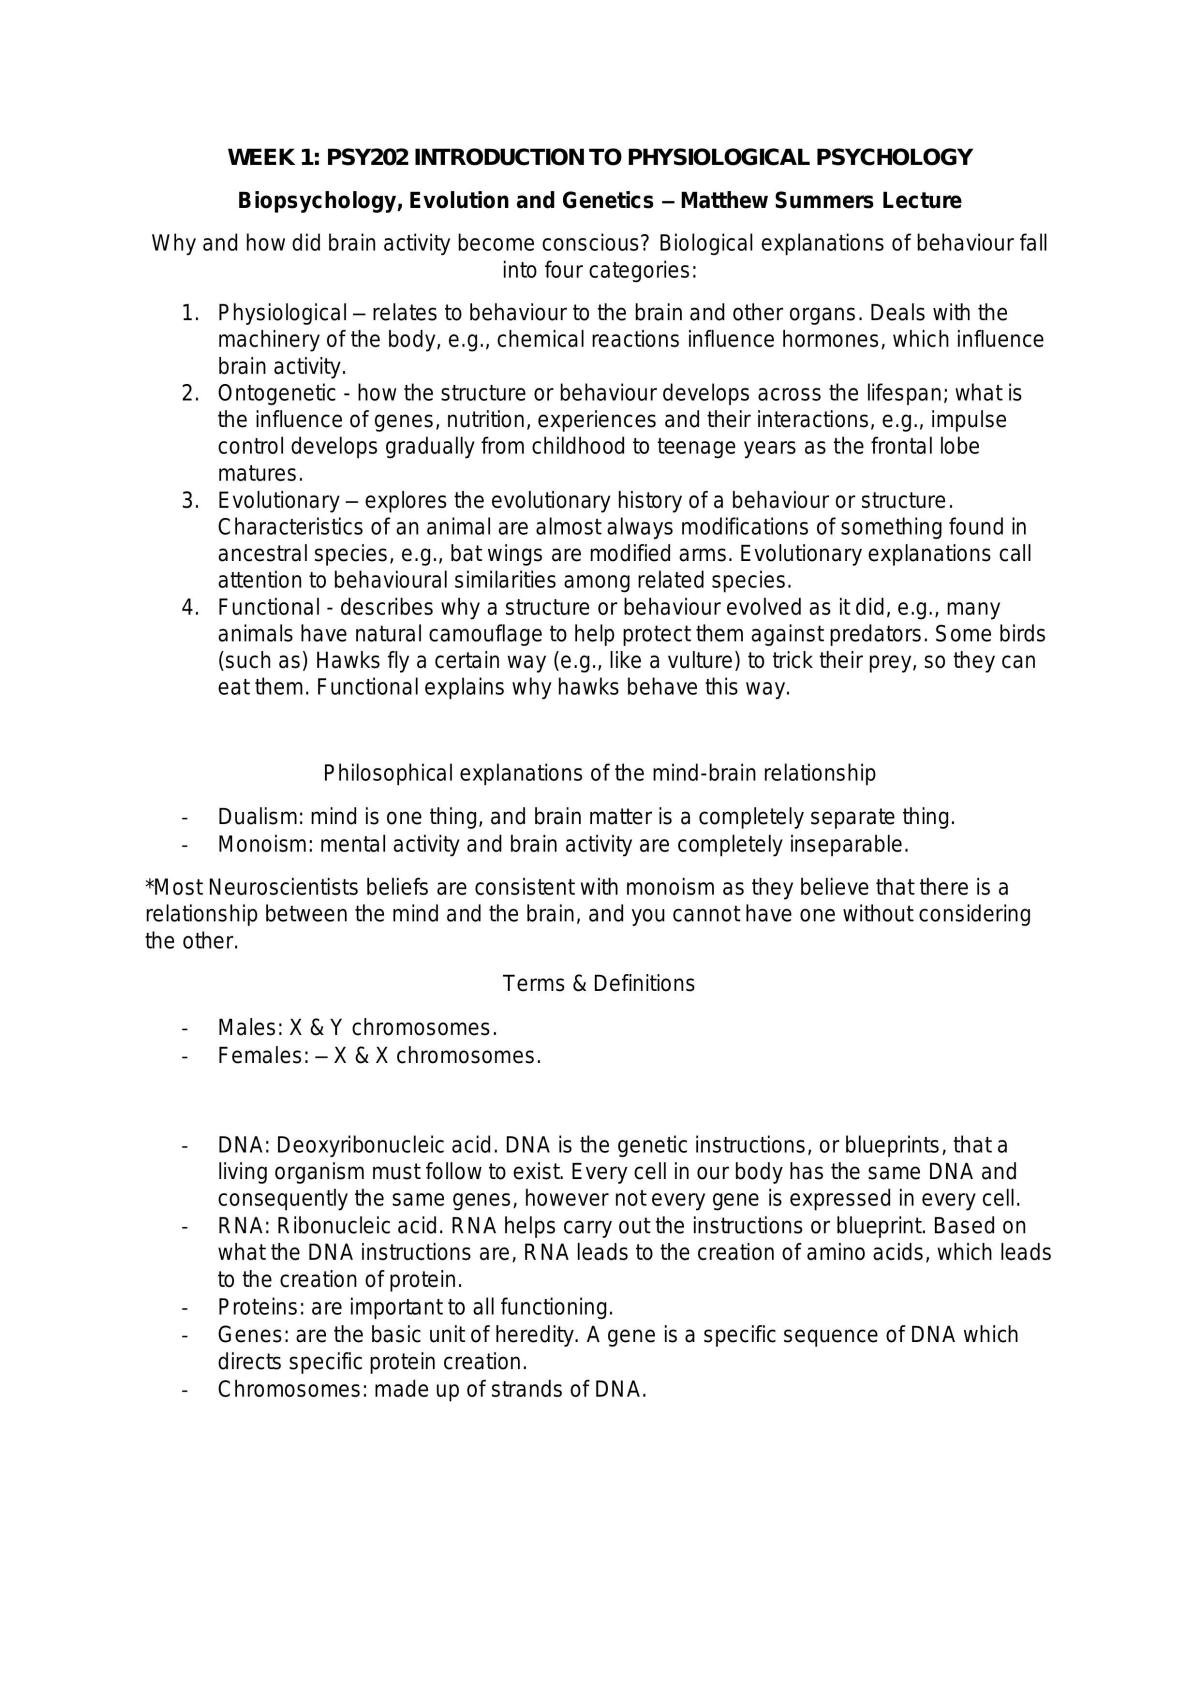 PSY202 Physiological Psychology Complete Course Notes - Page 1